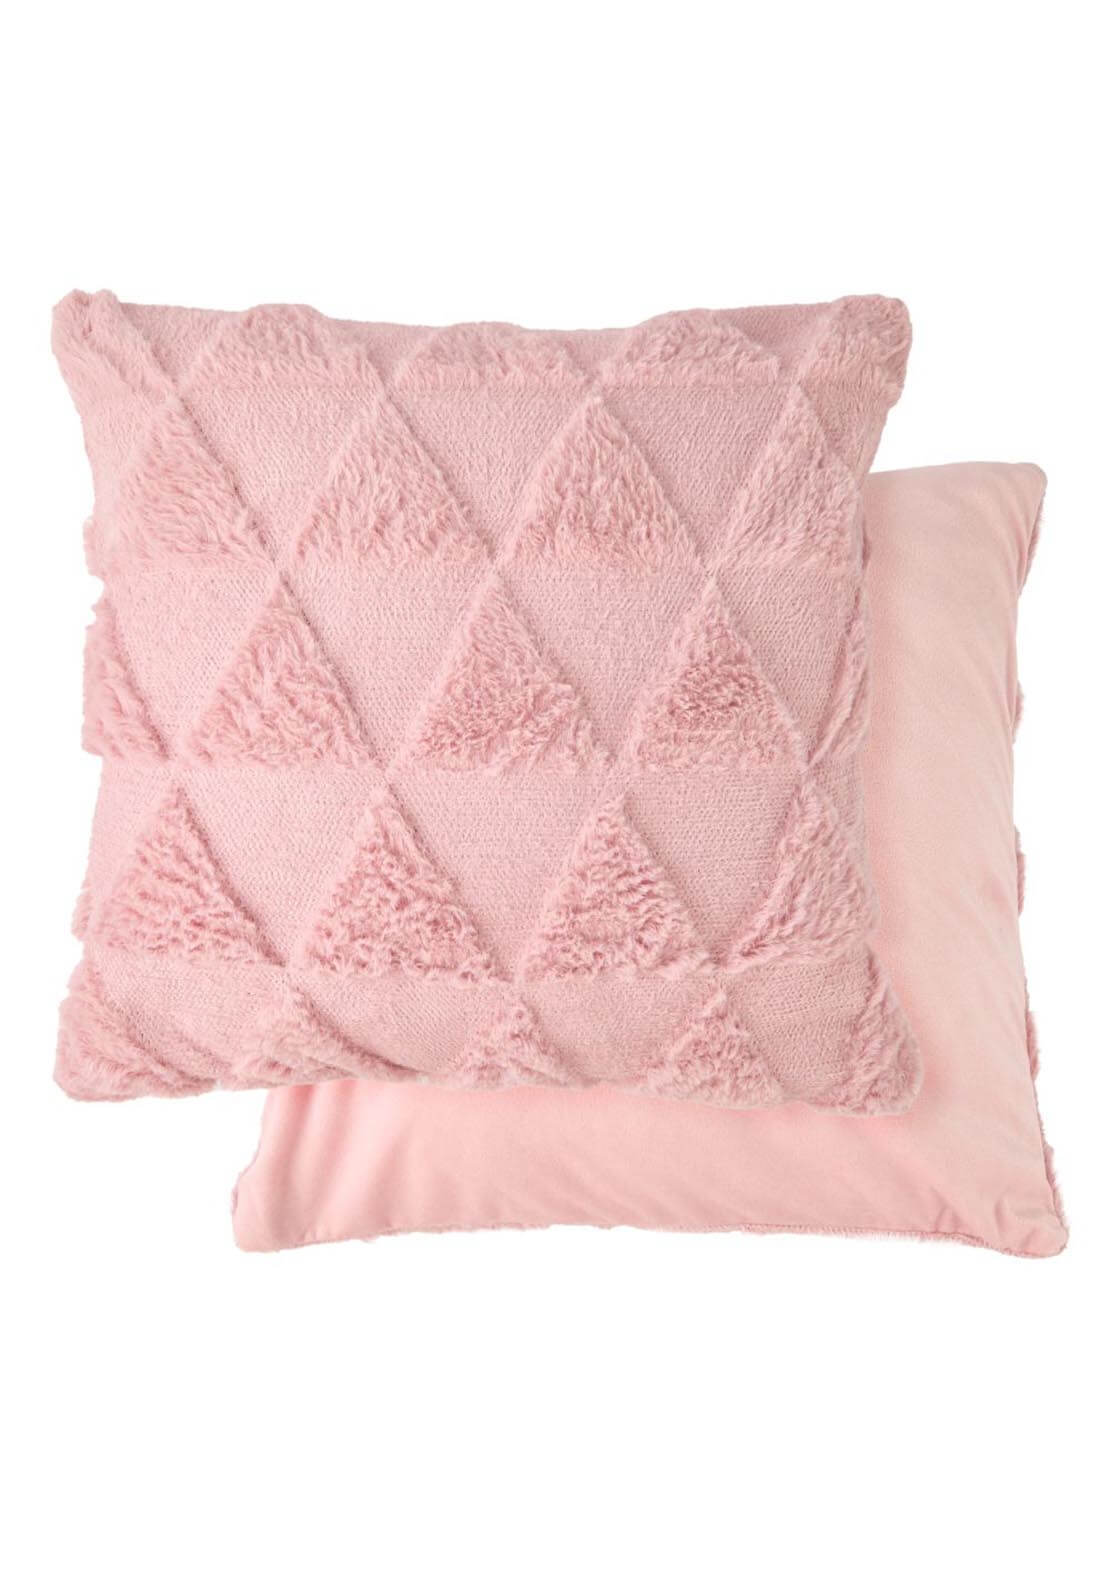 The Home Collection Nyla Cushion - Blush Pink 2 Shaws Department Stores